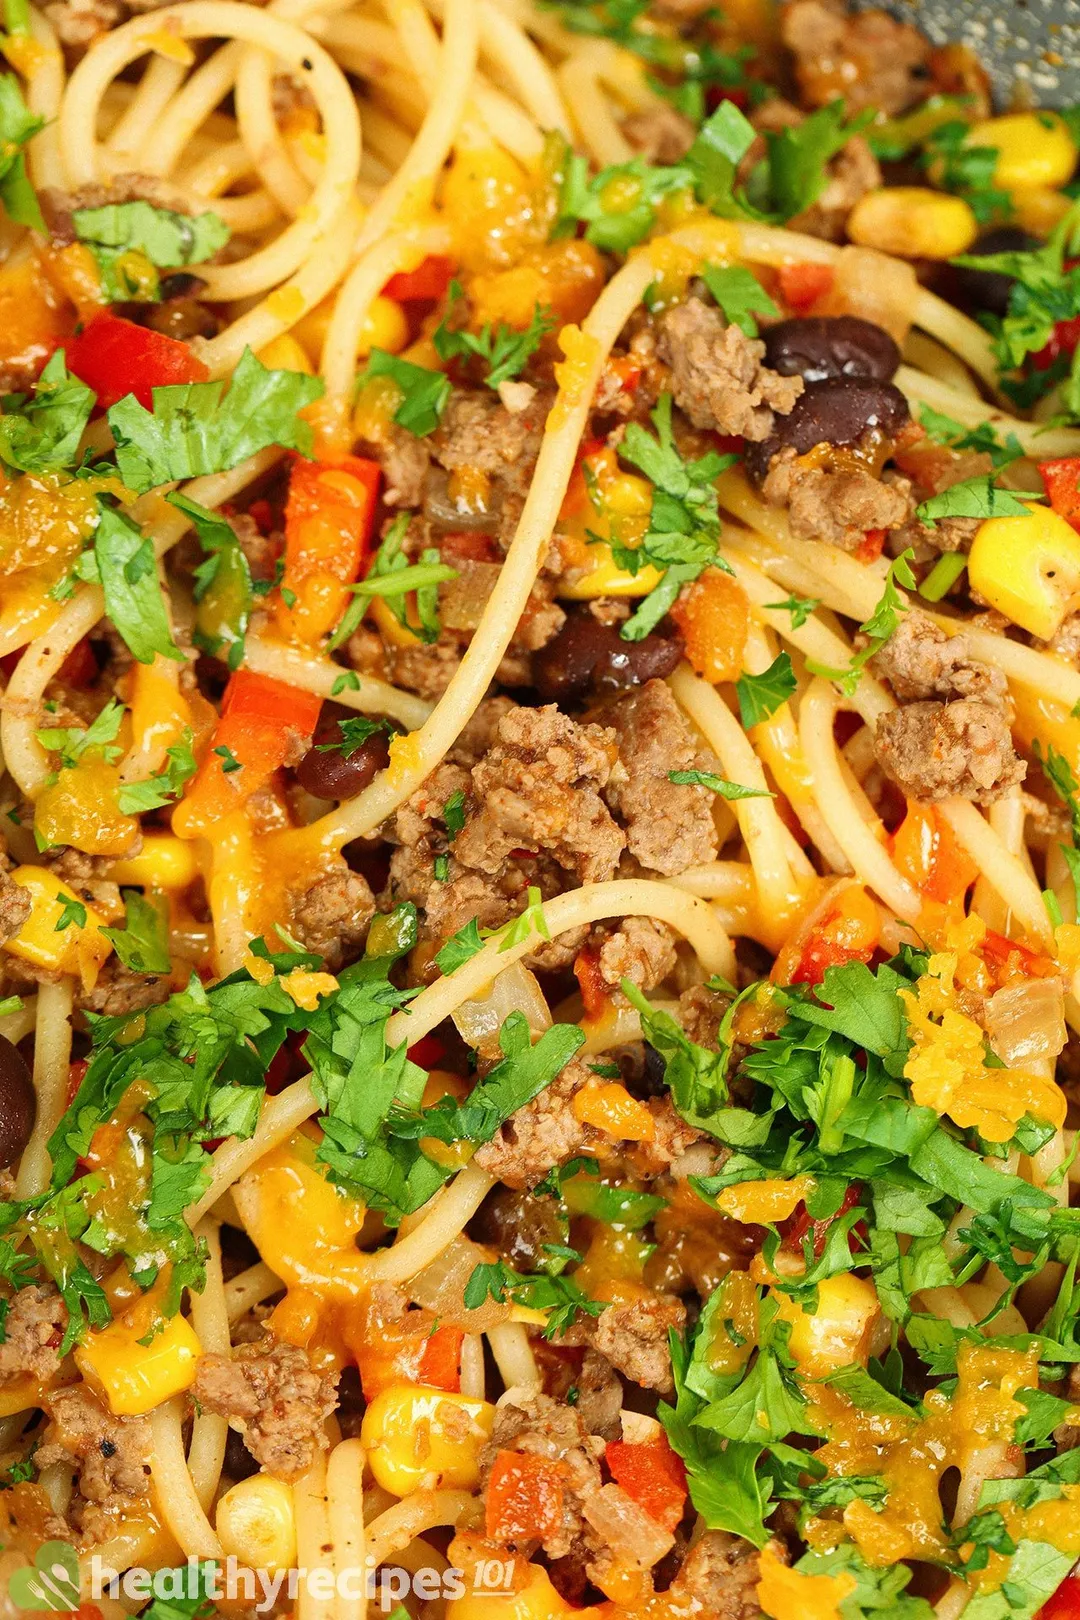 close-up shot of cooked spaghetti with ground beef and veggies, garnished with chopped coriander